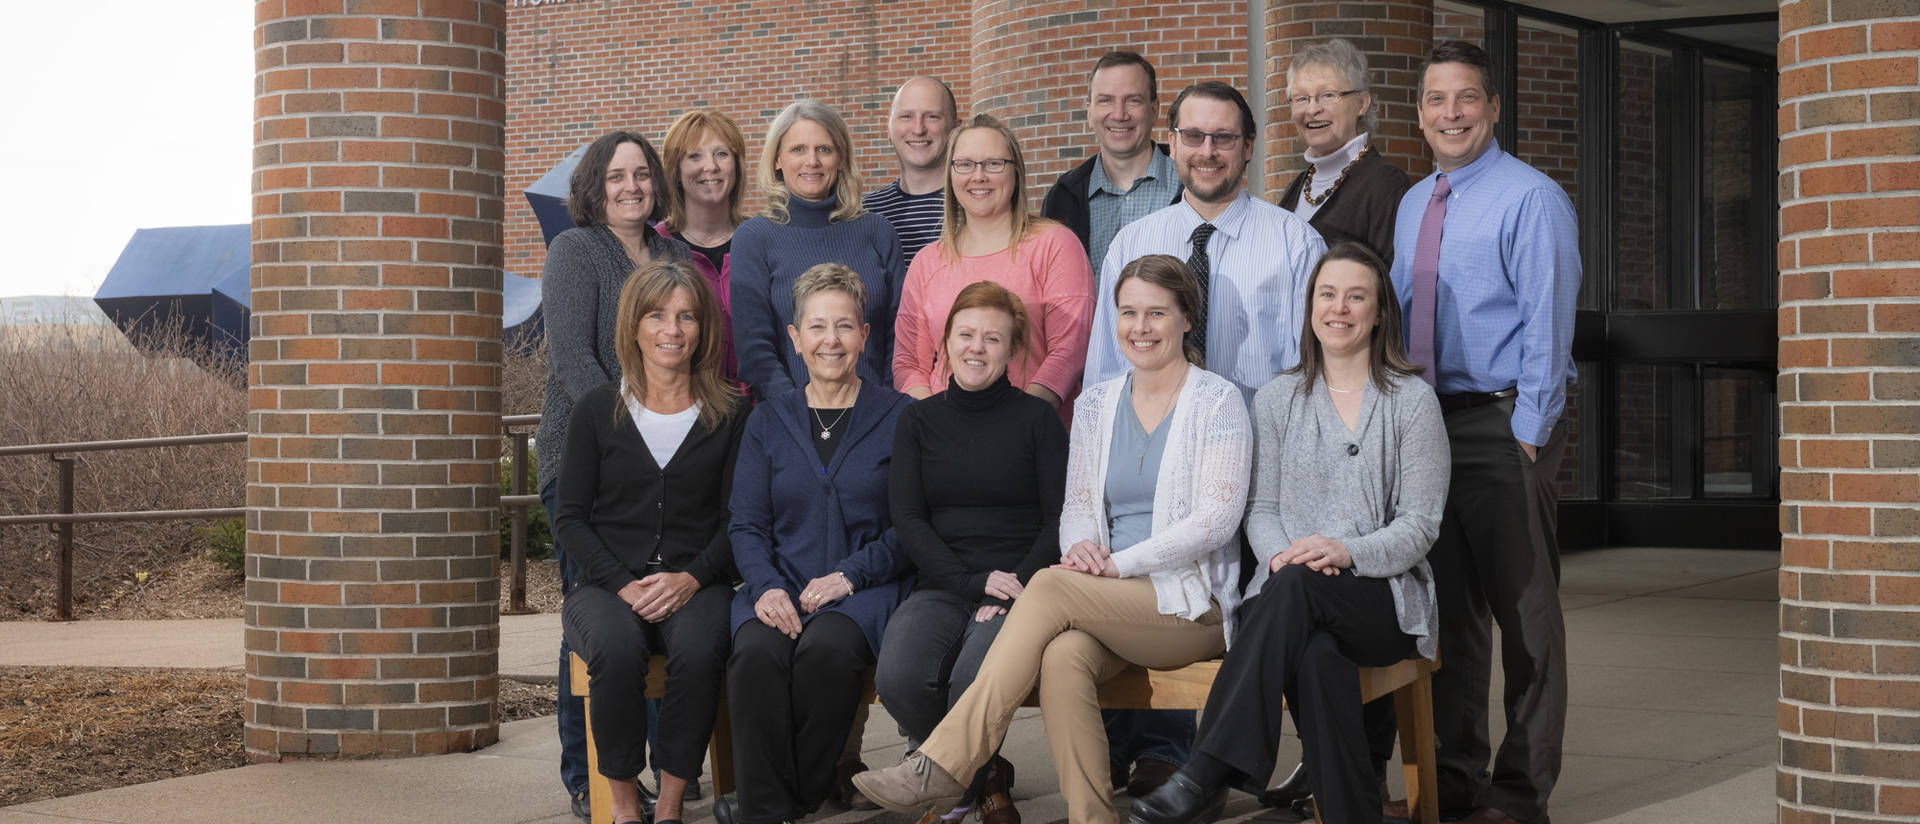 UW-Eau Claire communication sciences and disorders faculty and staff